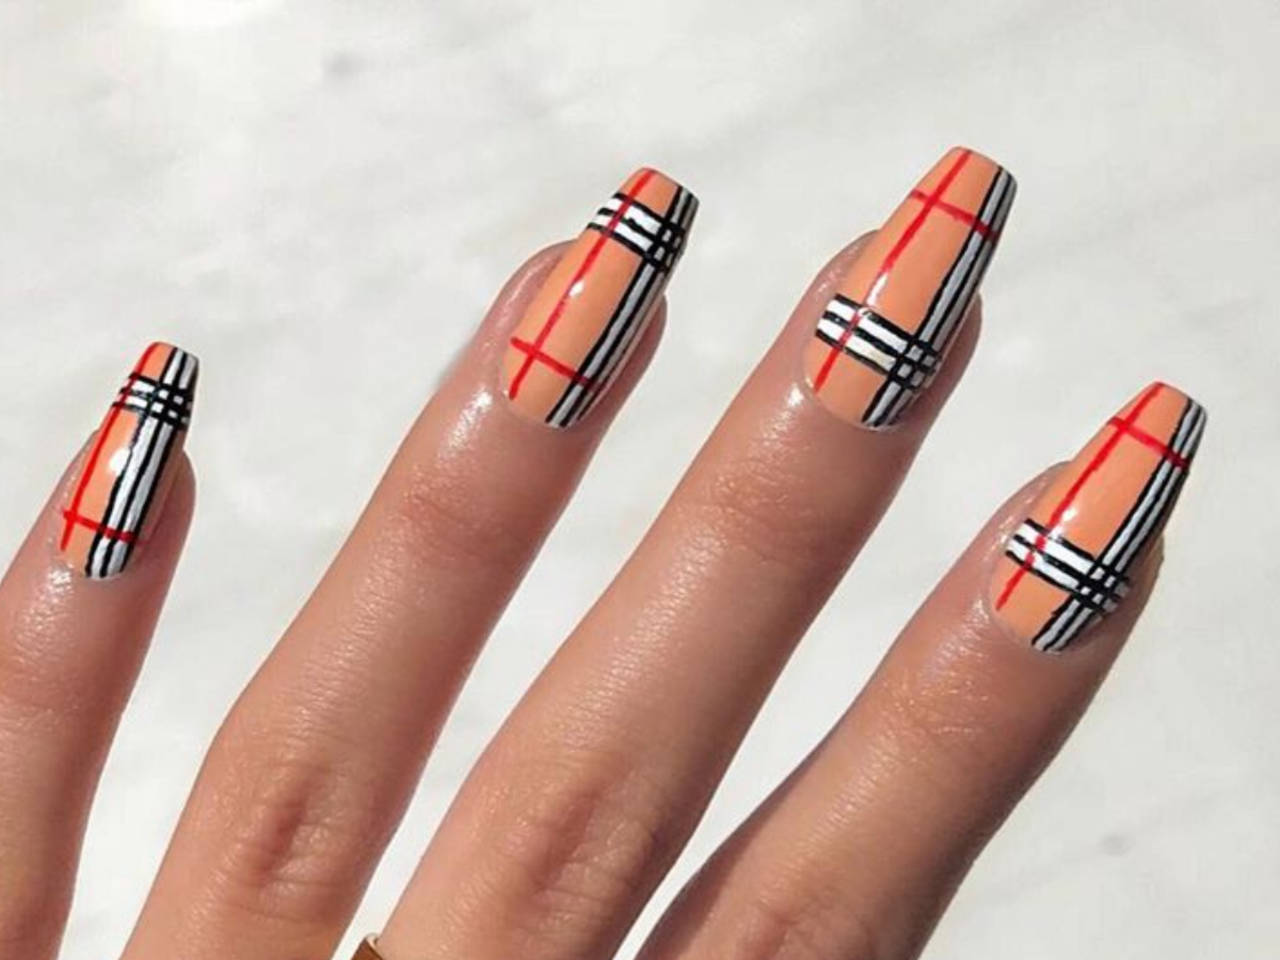 From Chanel to Gucci: Brand logo nail art is the latest manicure trend you  need to try - Times of India